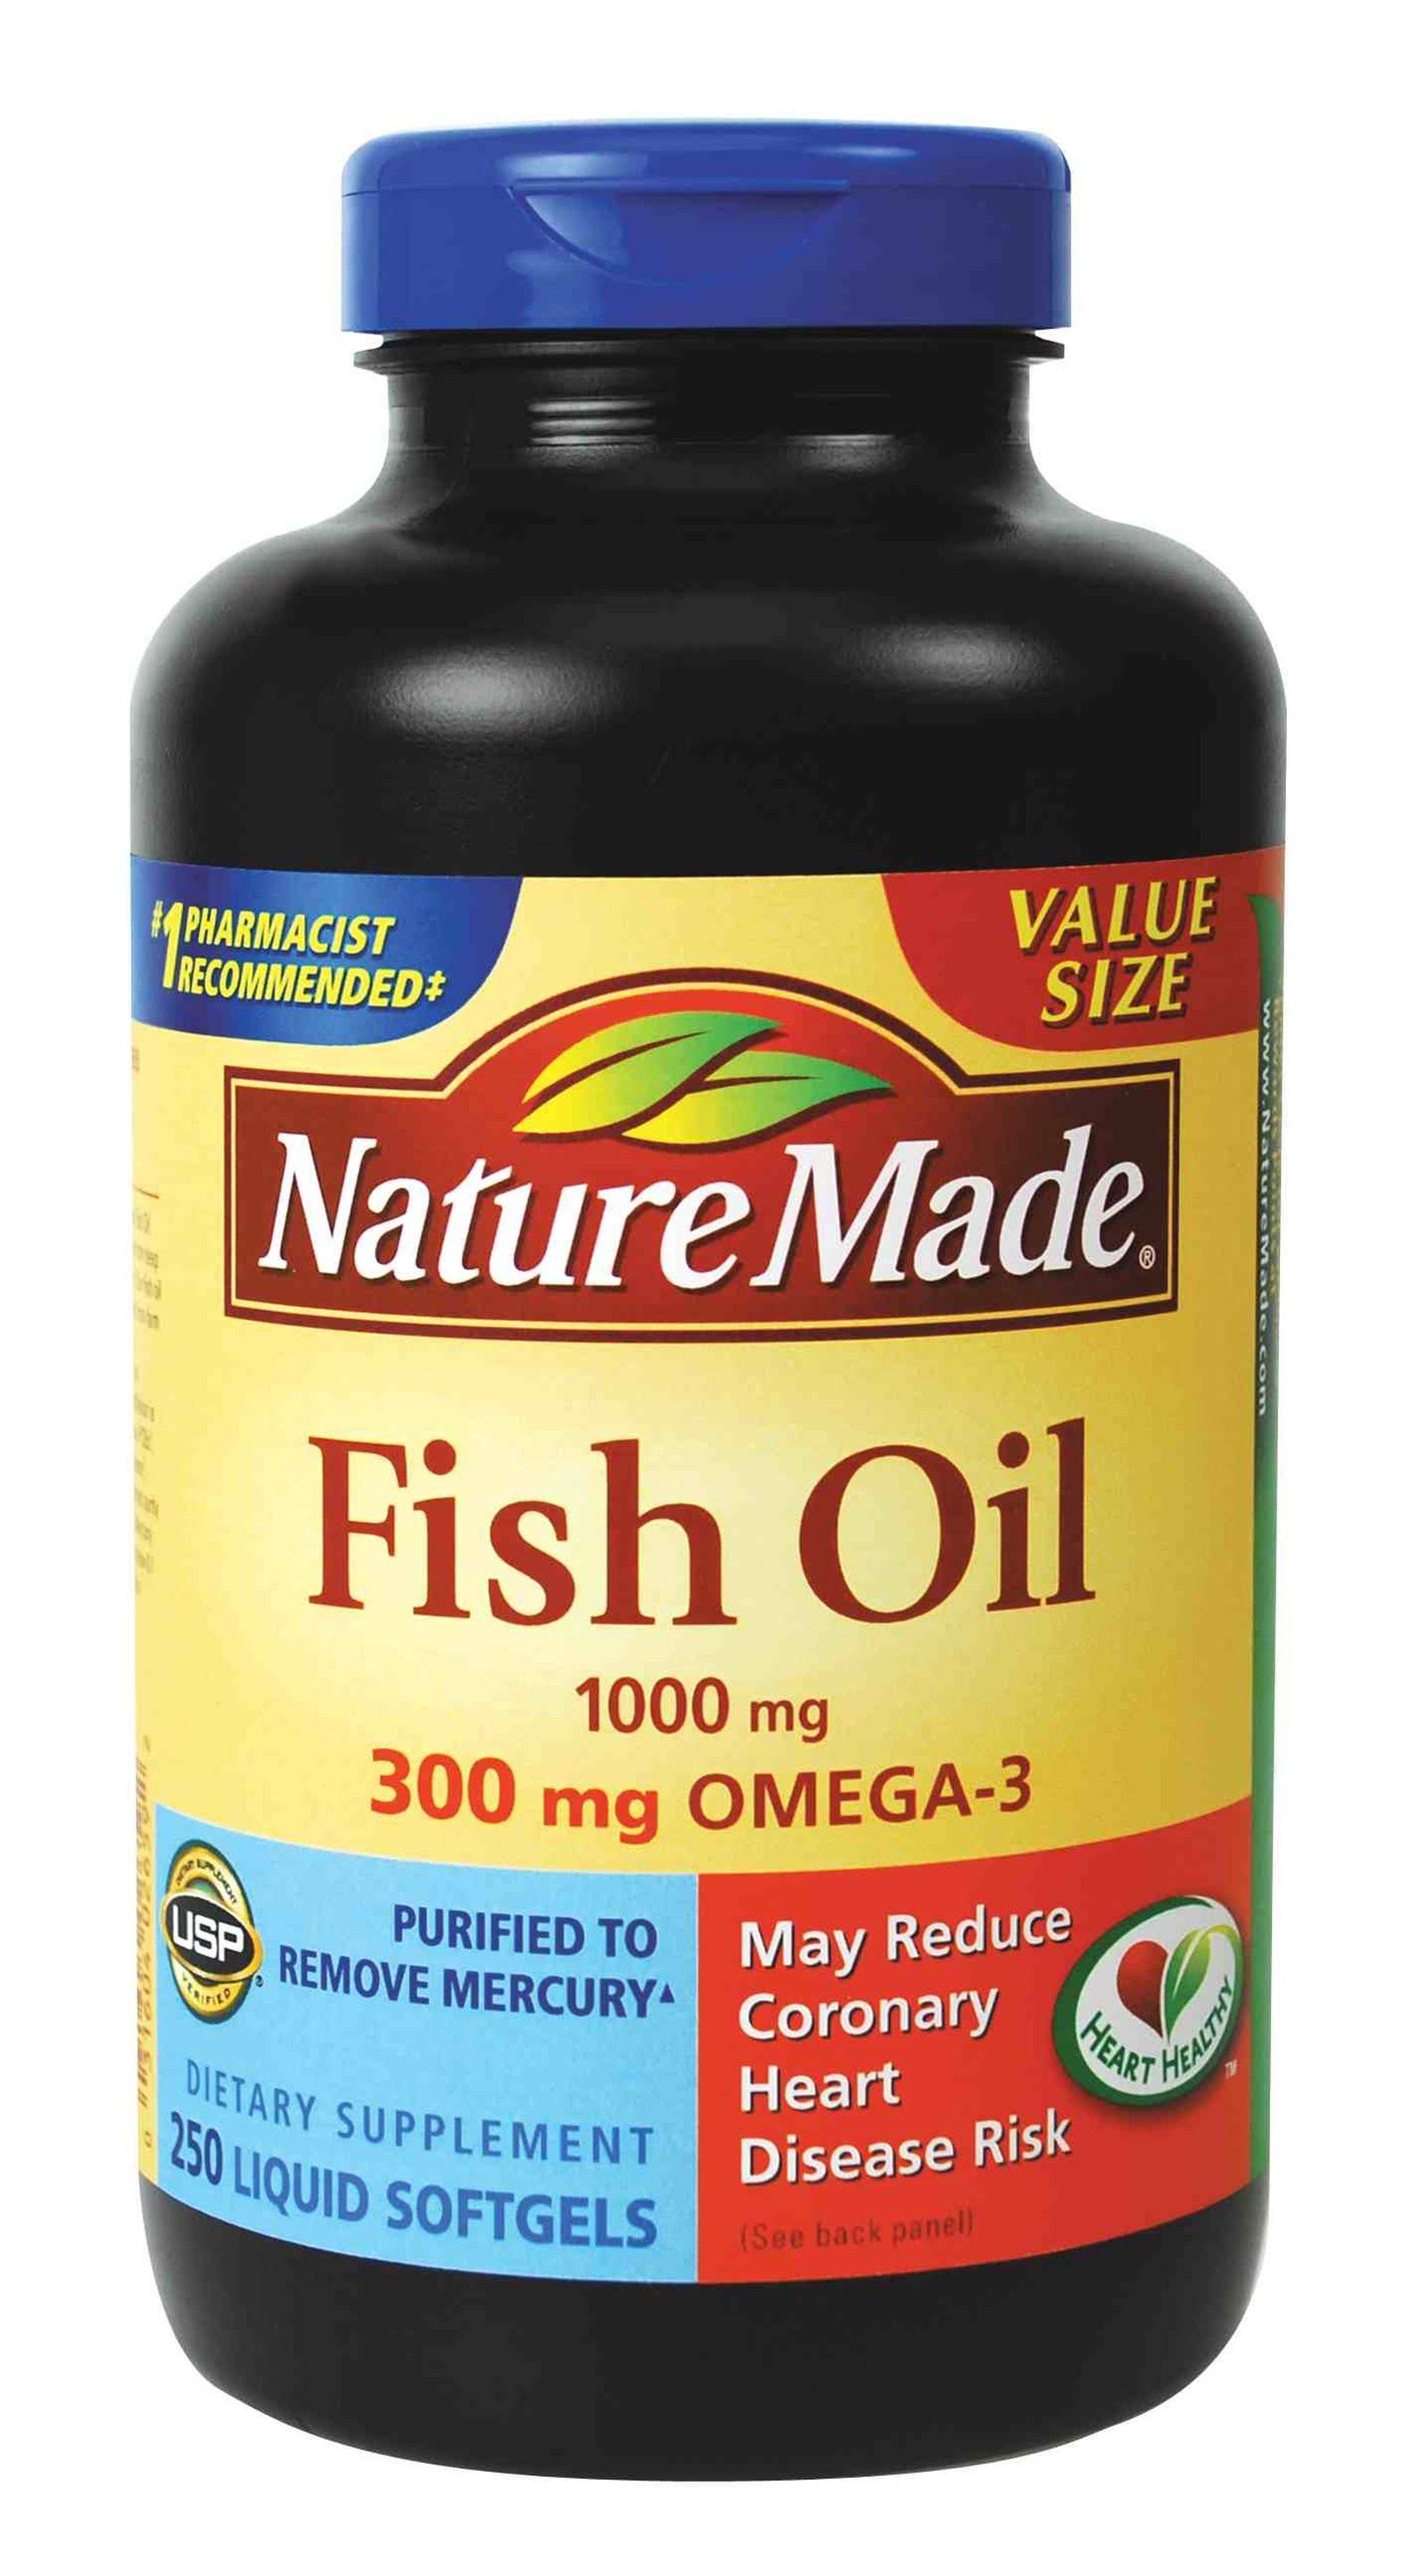 Nature Made Fish Oil Dietary Supplement - 1000mg, Value Size, Softgels, 250ct